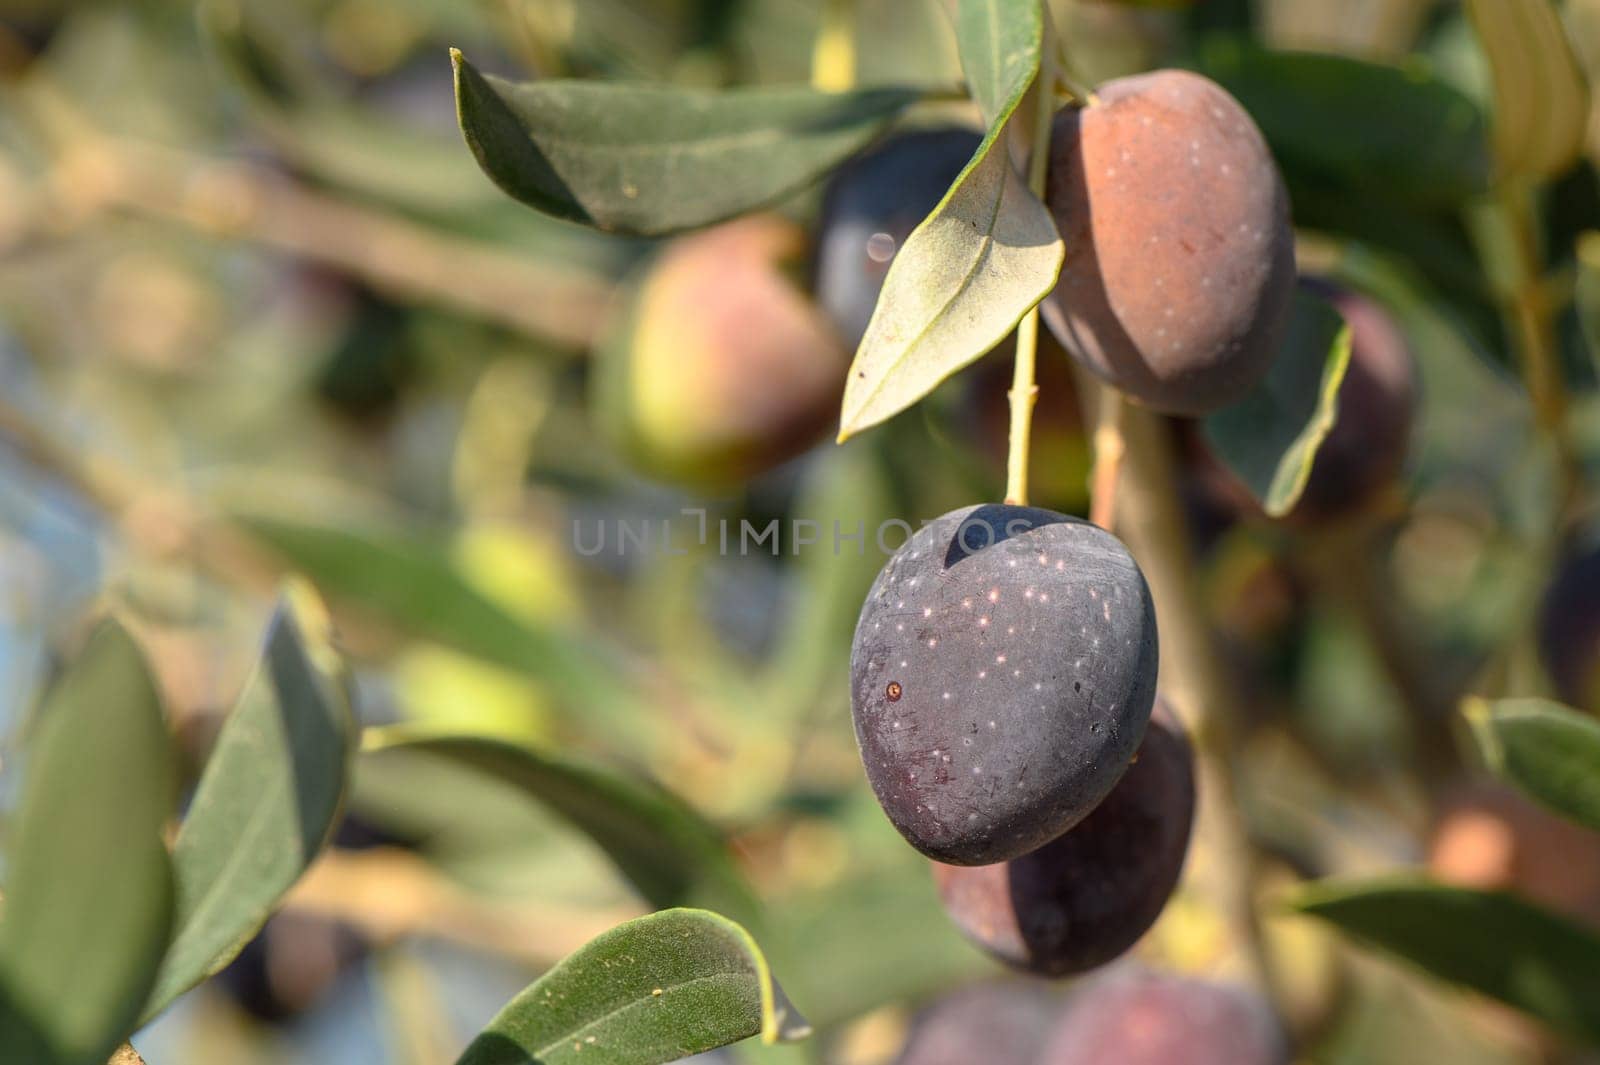 olives on the island of Cyprus